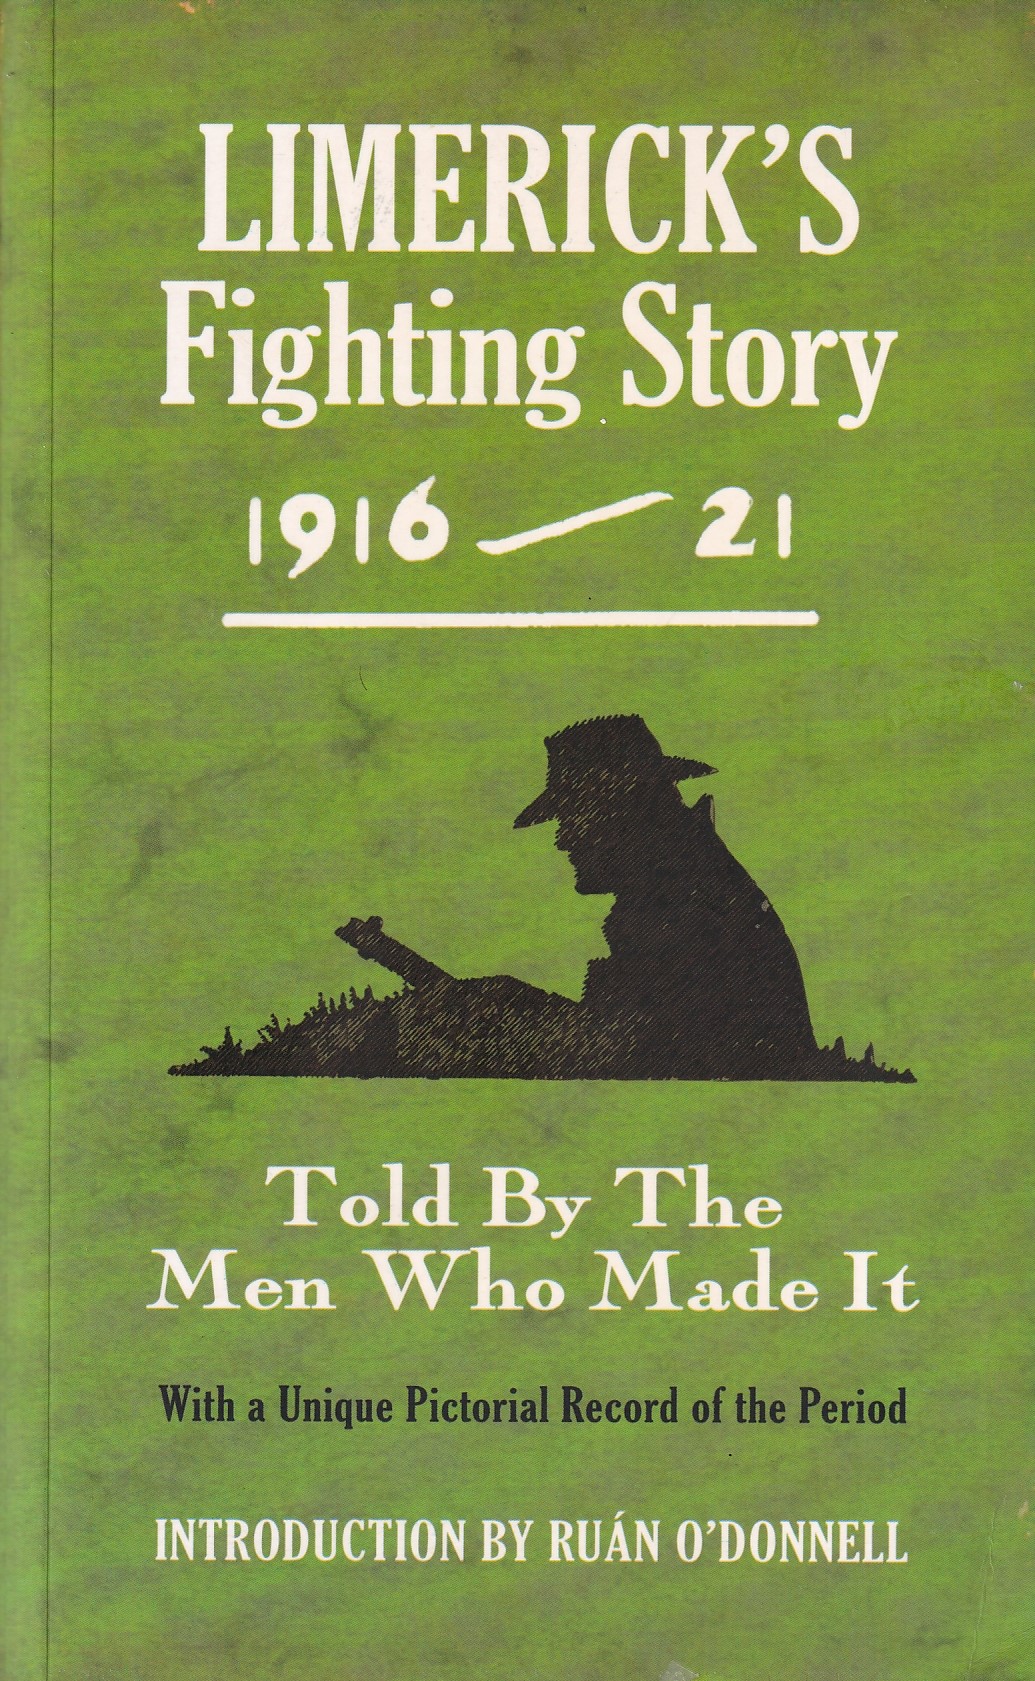 Limerick’s Fighting Story 1916-21: Told by the Men Who Made it | Ruán O'Donnell | Charlie Byrne's